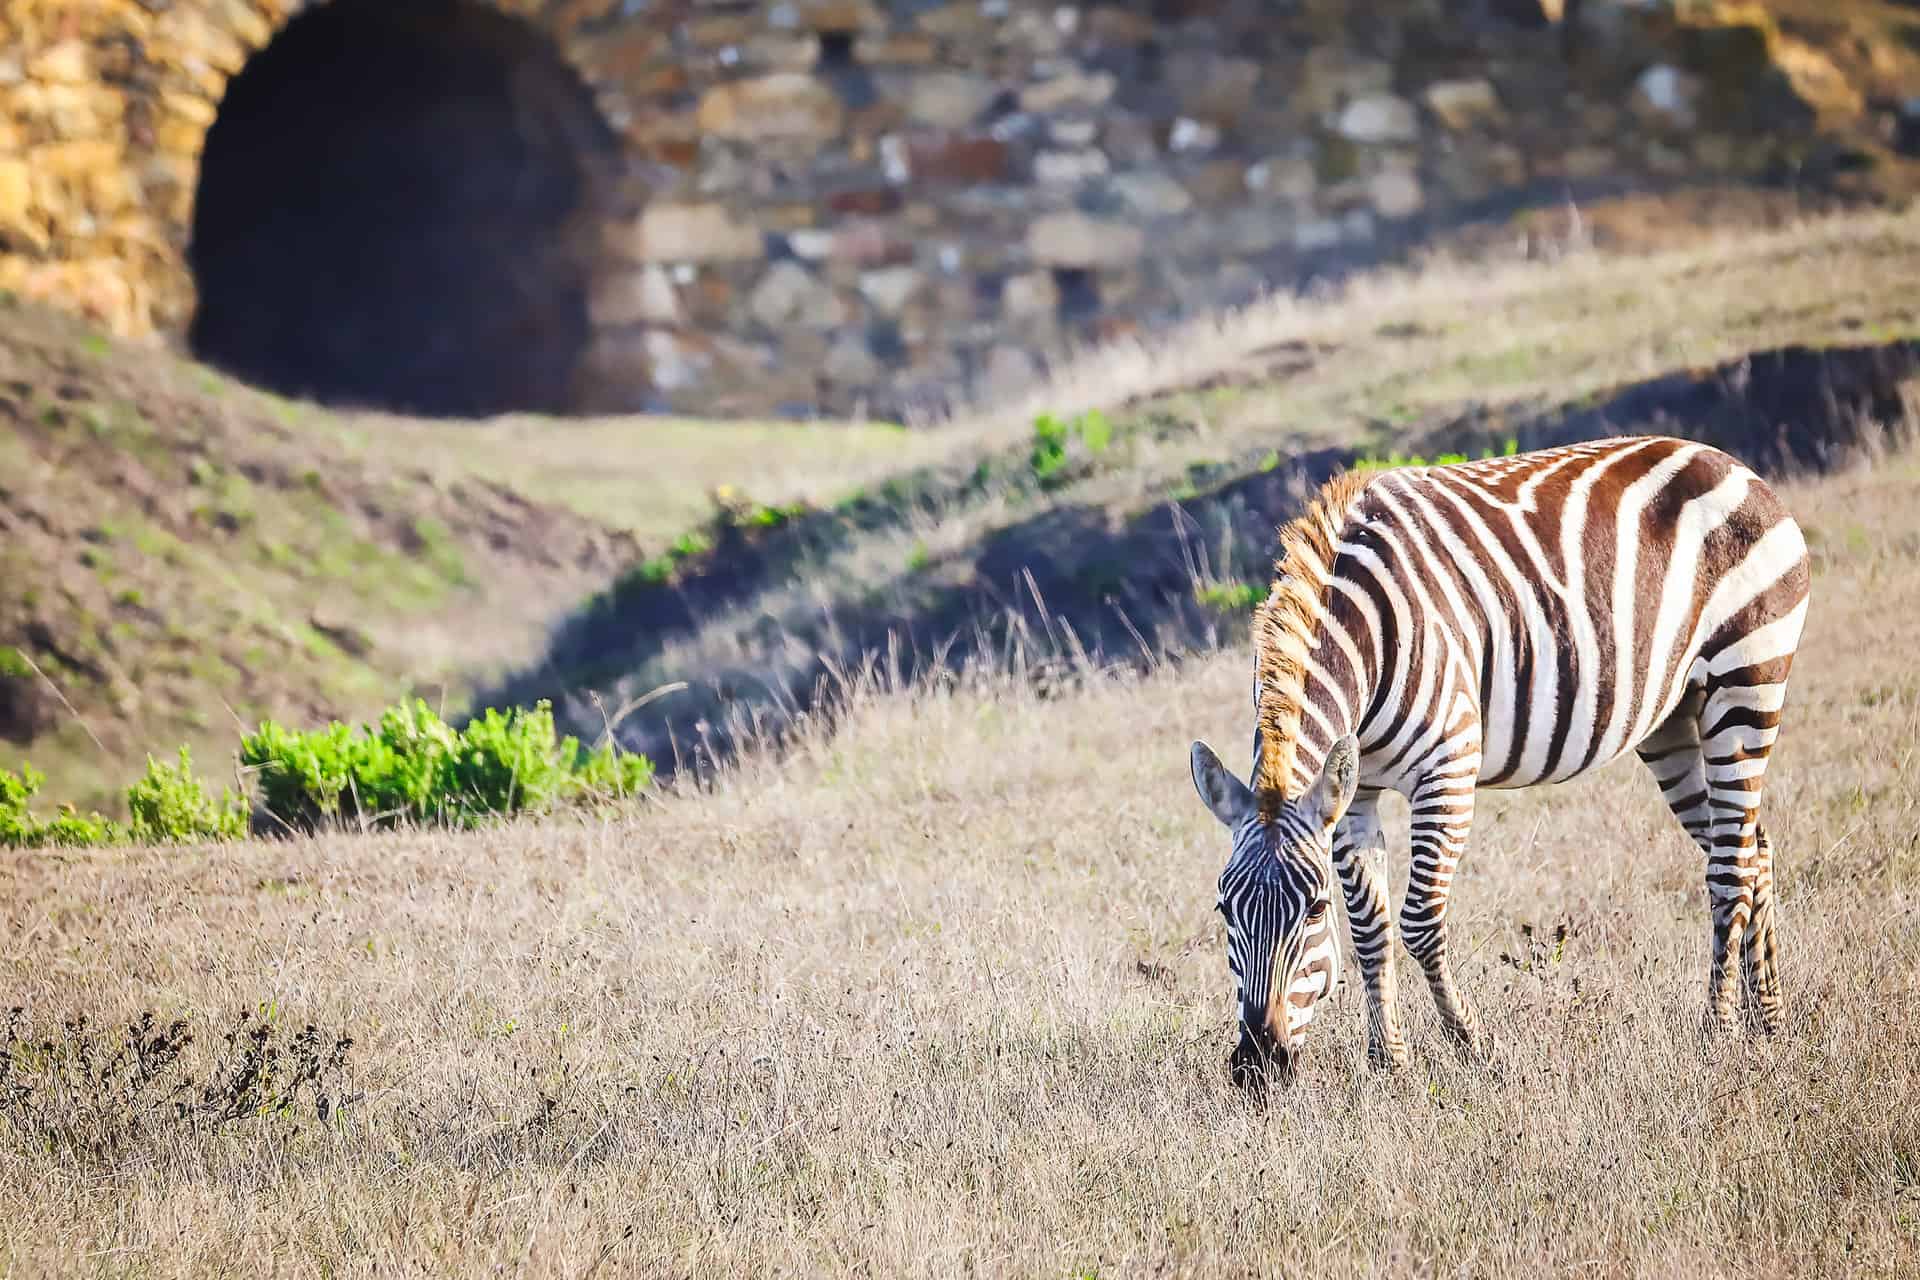 A lone zebra grazes on the grounds of Hearst Castle.